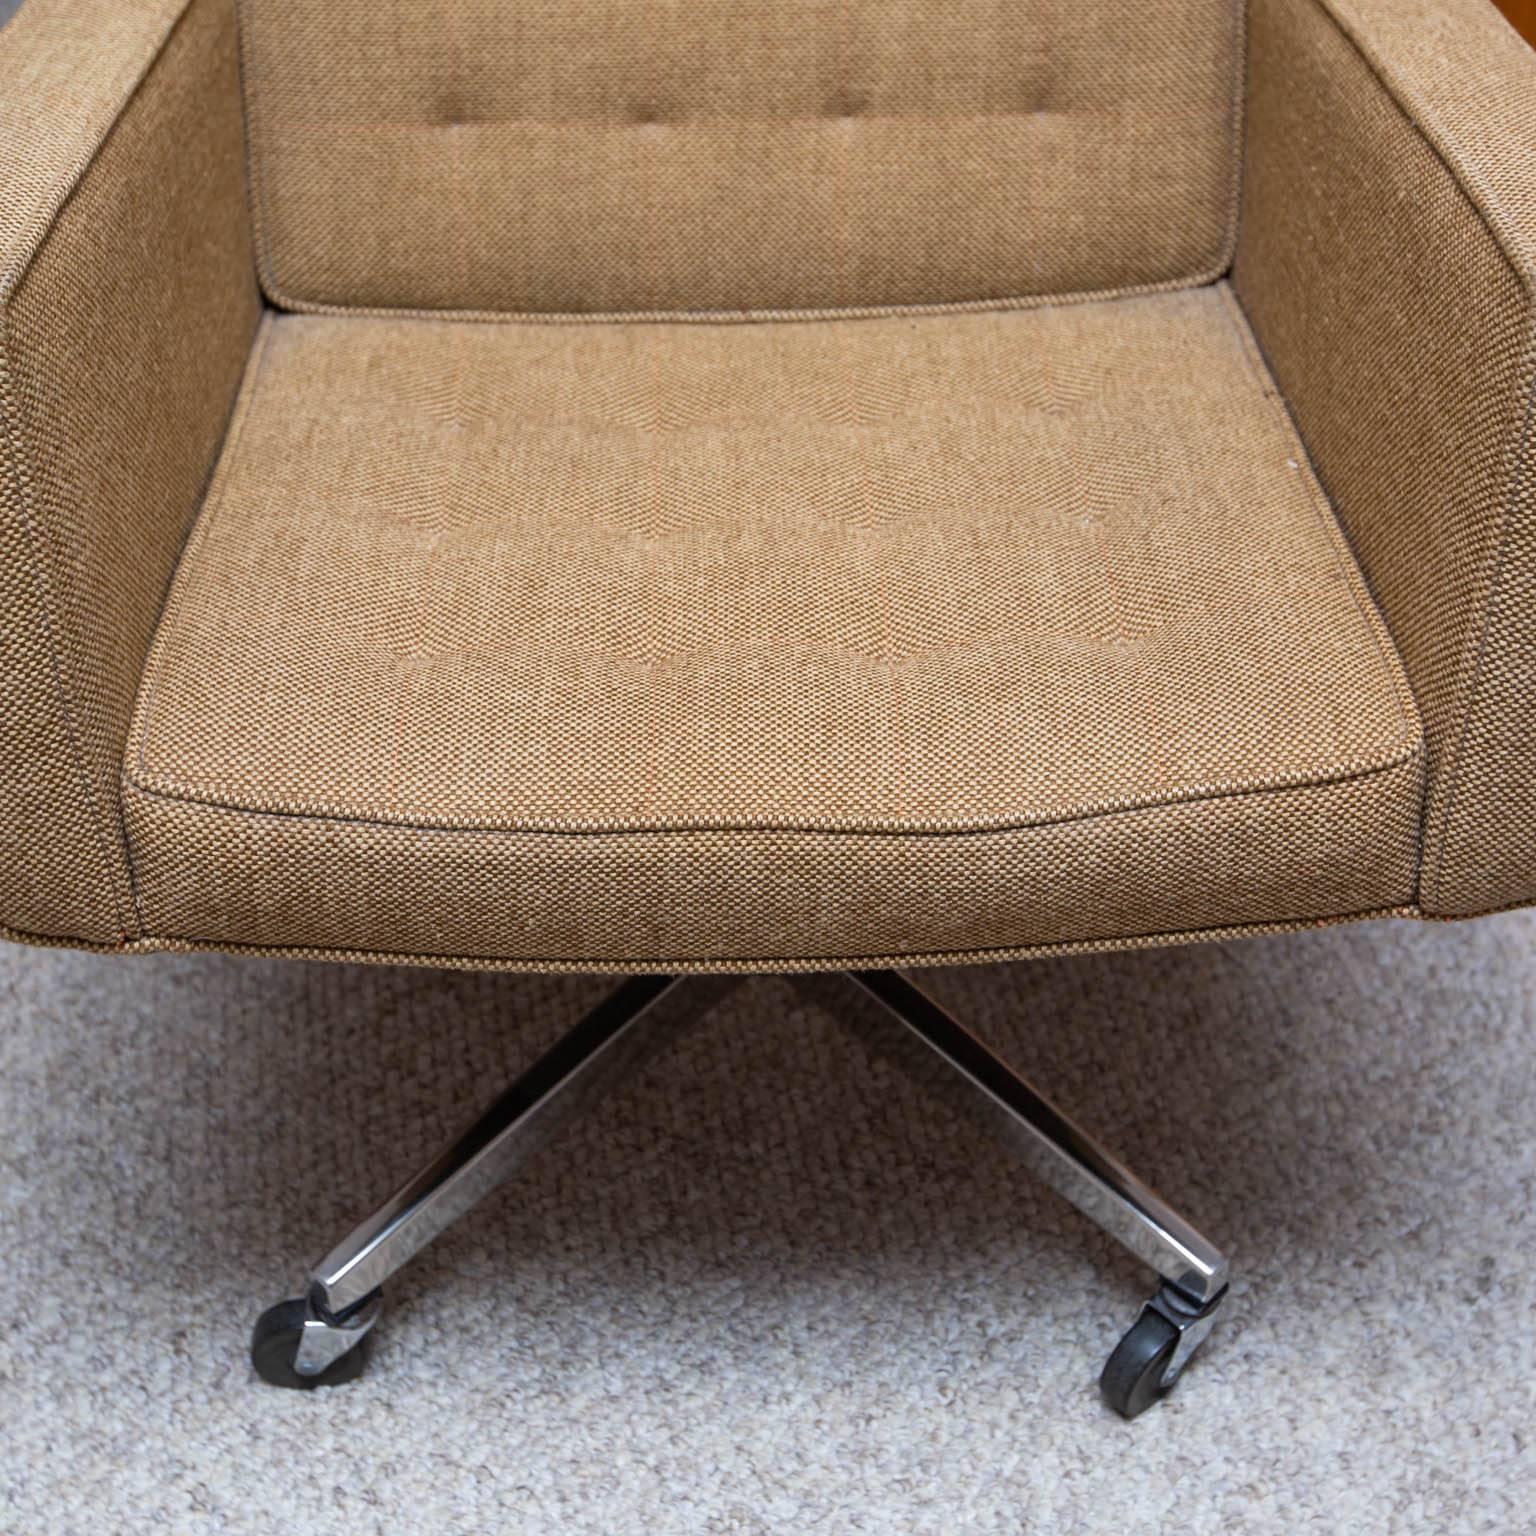 Executive desk chair in original Knoll fabric. Height adjusts as does pitch.